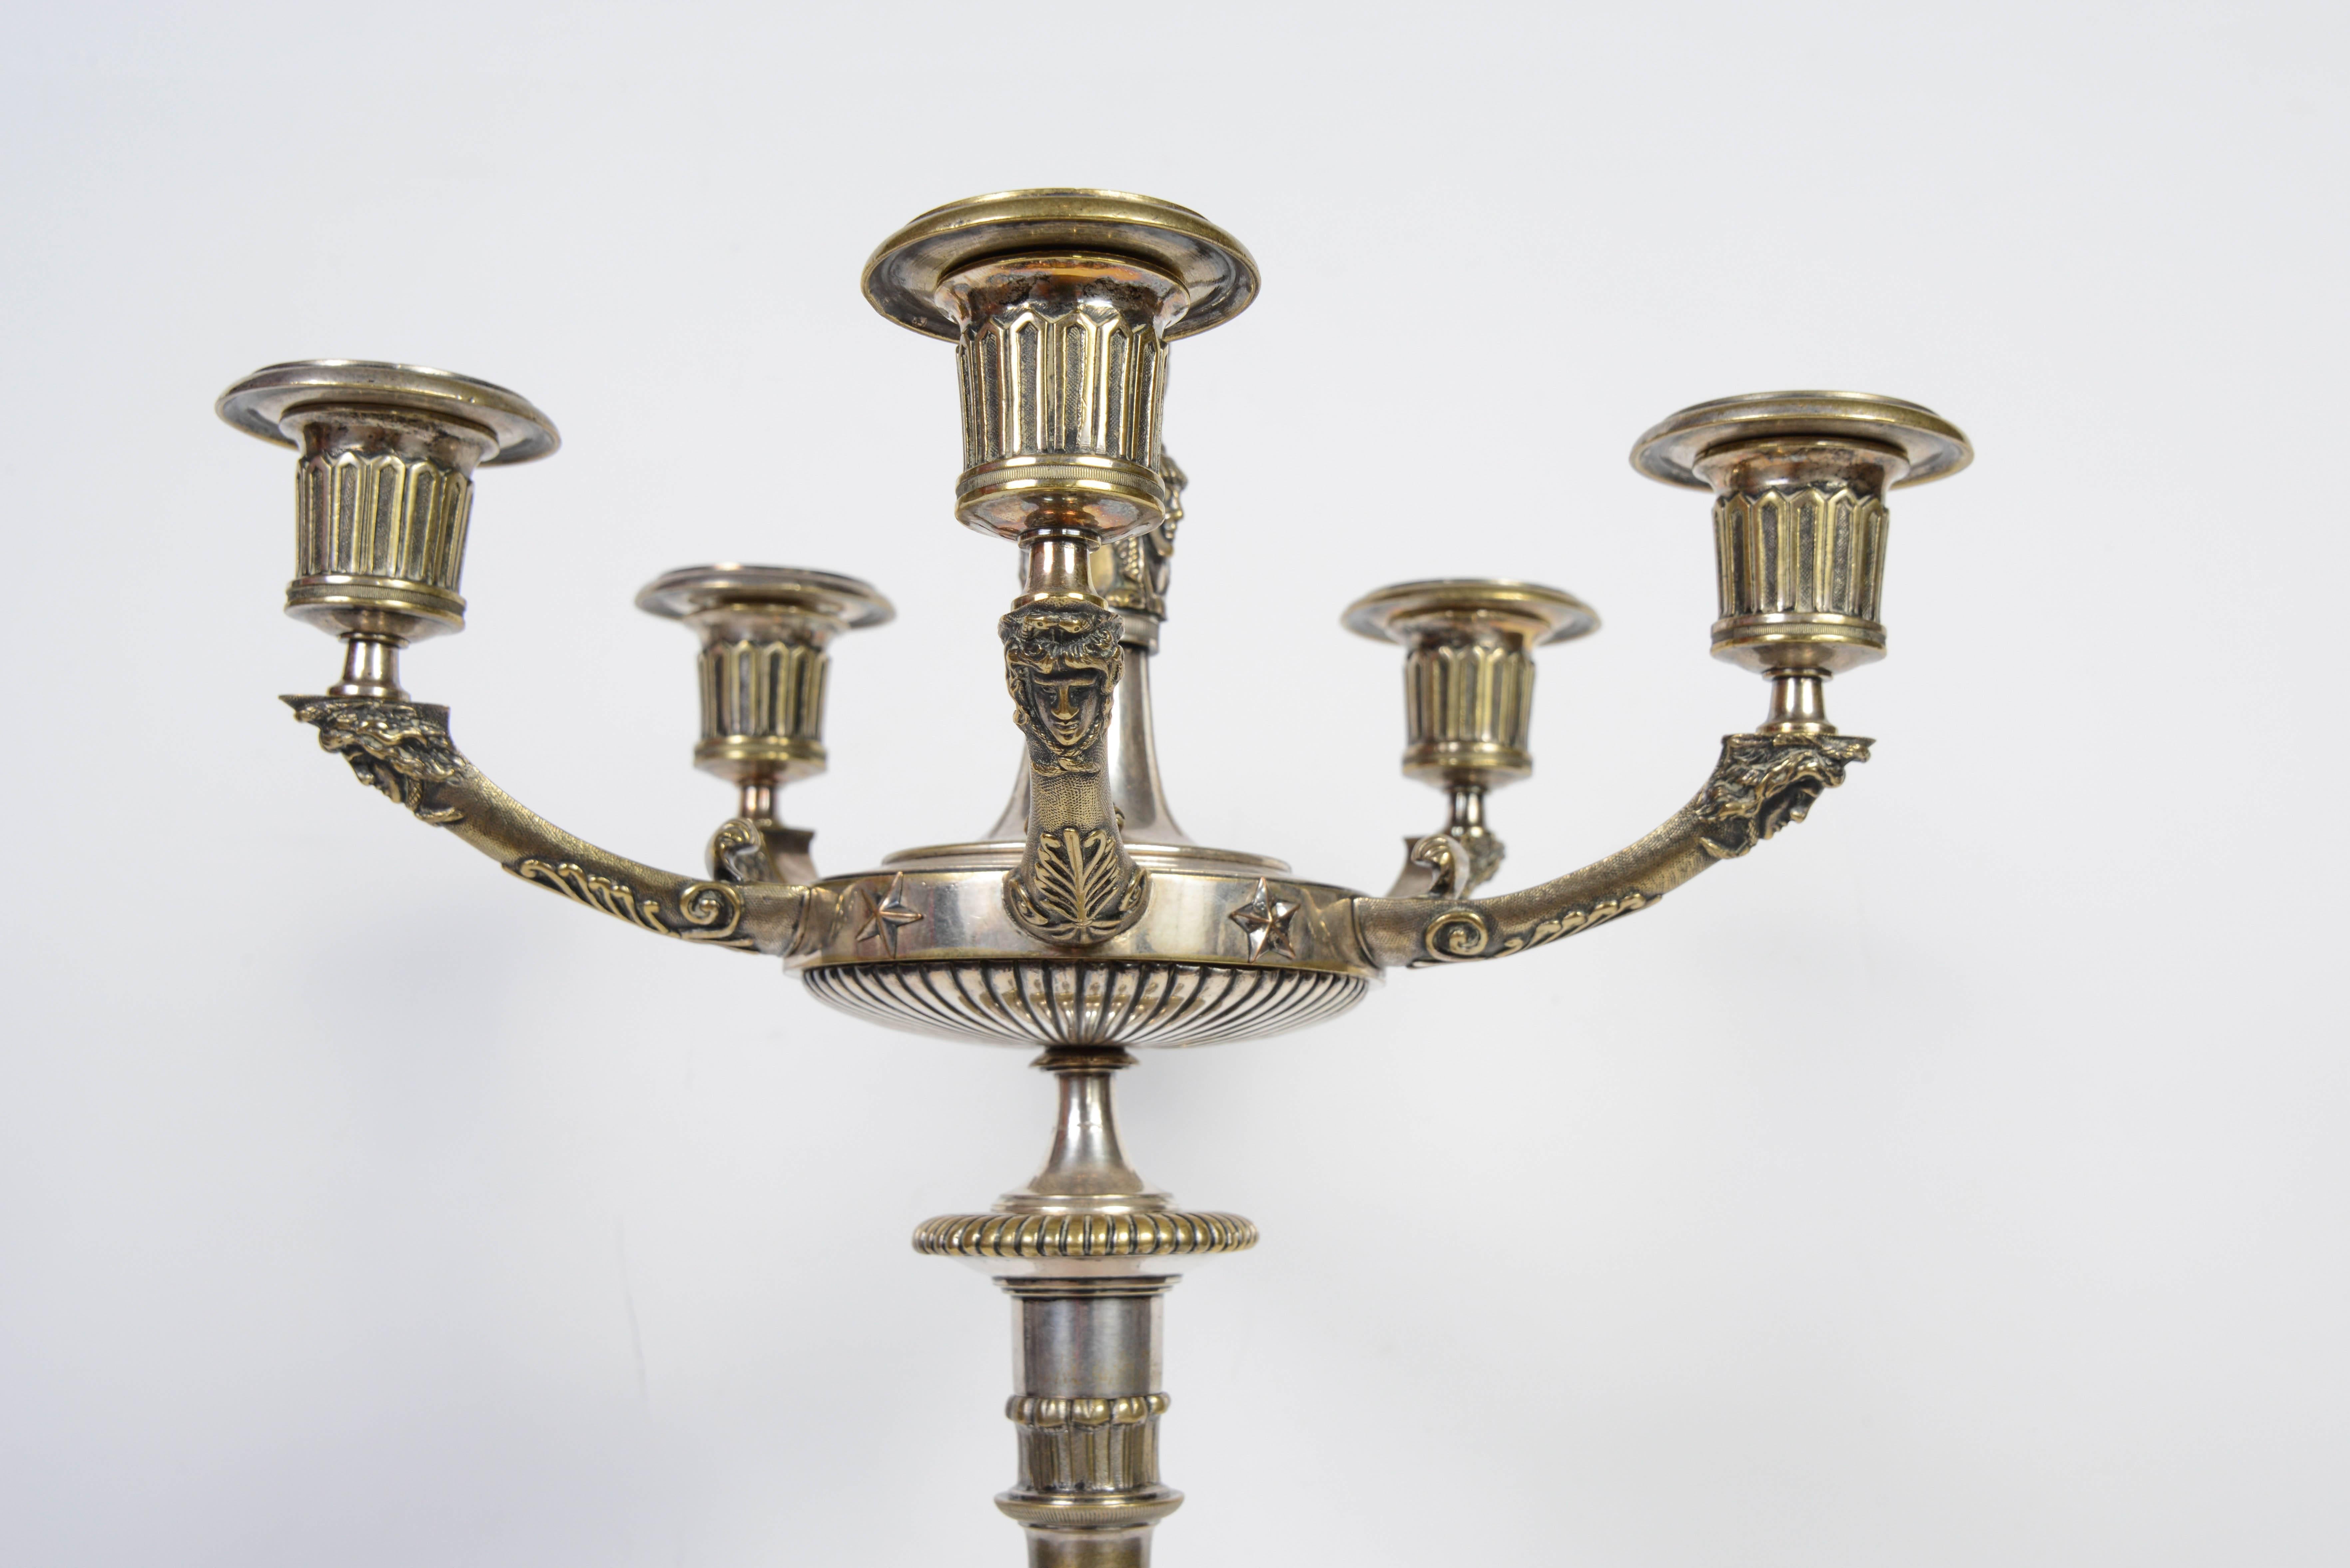 Silvered Pair of Empire Period Candelabras by Claude Galle